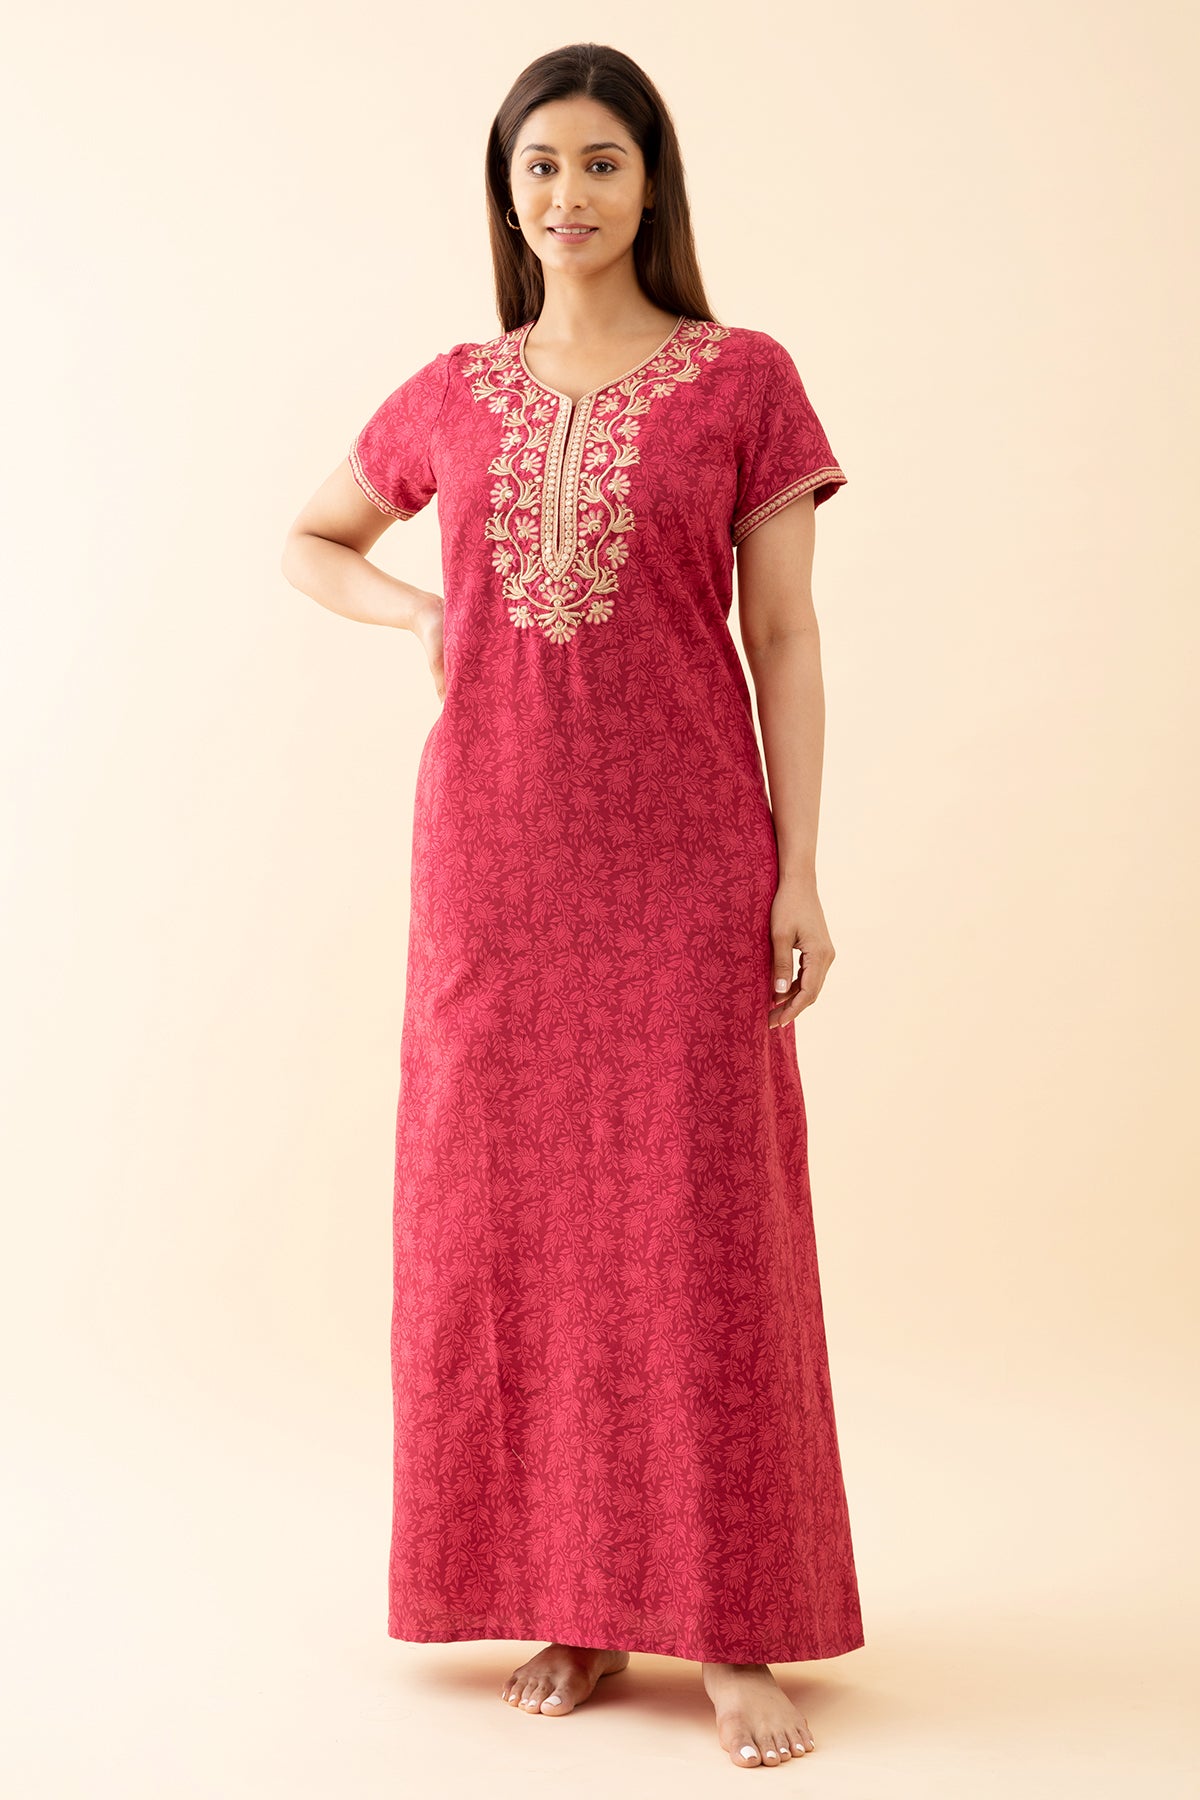 All Over Floral Printed Nighty With Contrast Embroidered Yoke Pink